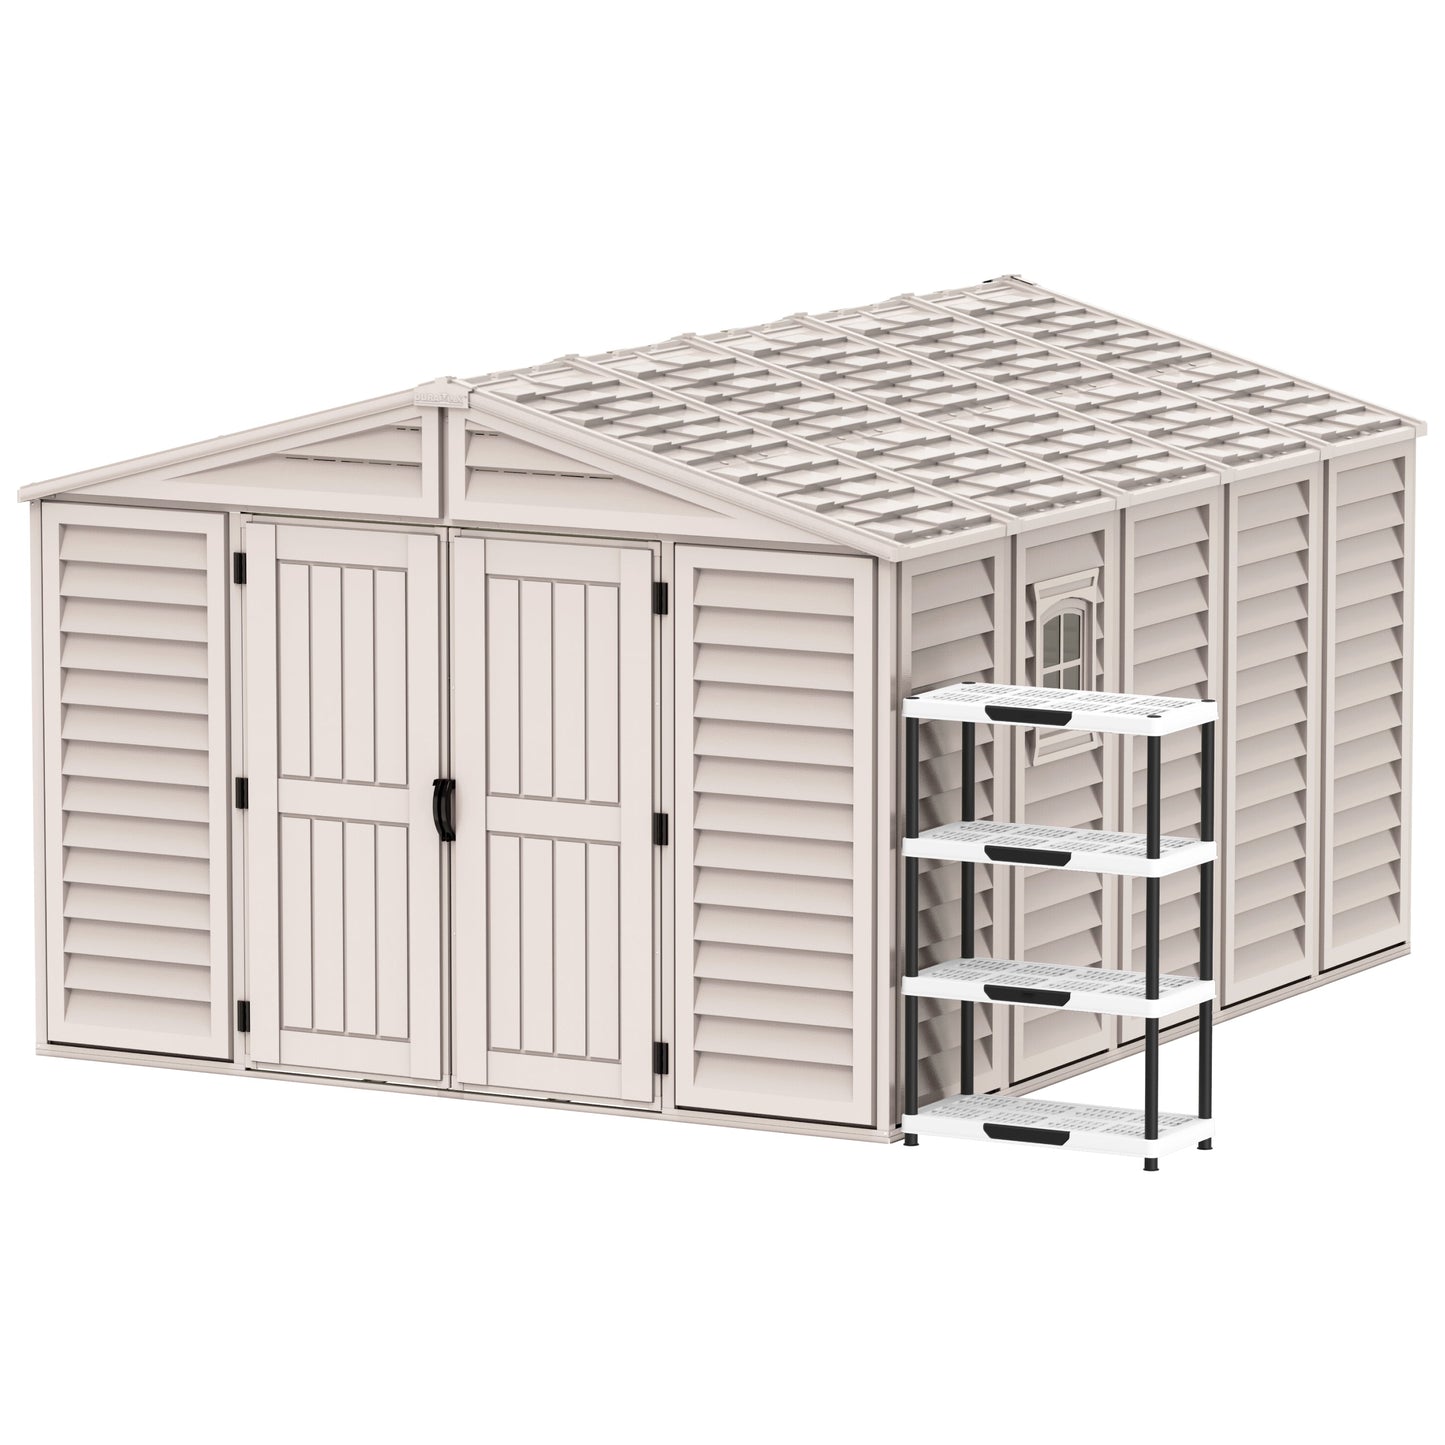 WoodBridge 10.5x13ft 324.8 x 405 x 233.2 cm Resin Garden Storage Shed with FREE Shelving Rack 4